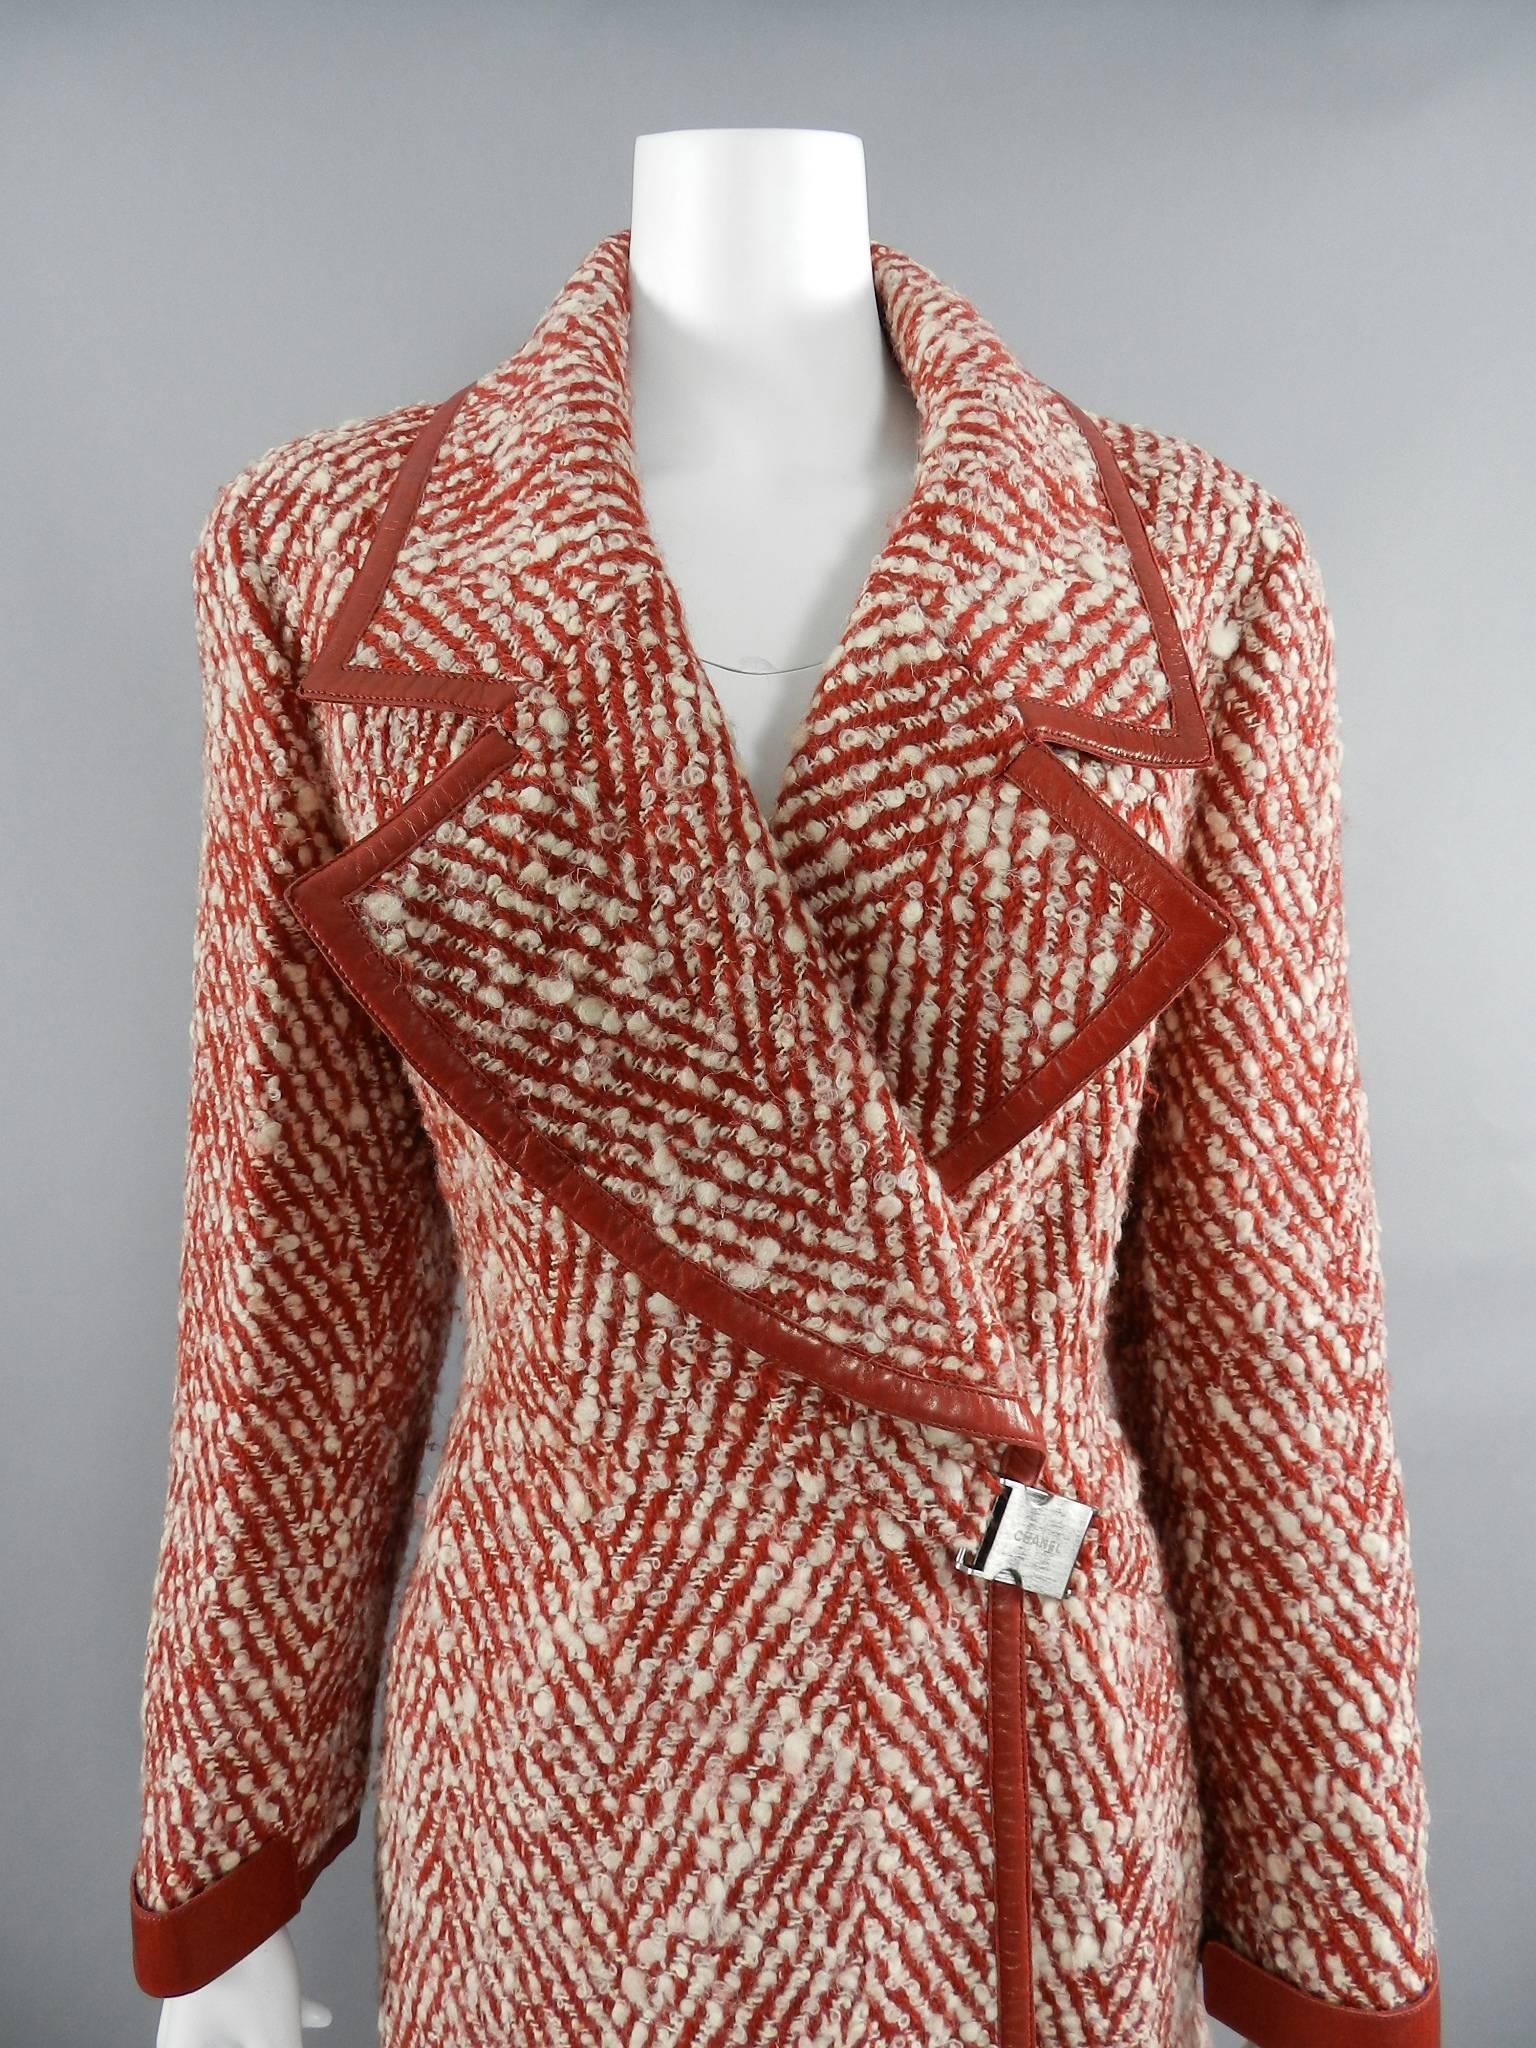 Chanel red and ivory boucle tweed wool coat.  Trimmed with leather and fastens at left side waist with logo buckle. Lined in ivory jacquard CC logo silk. From the fall 2000 collection.  Very heavy wool full-length coat.  Tagged size FR 44 (USA 10 /